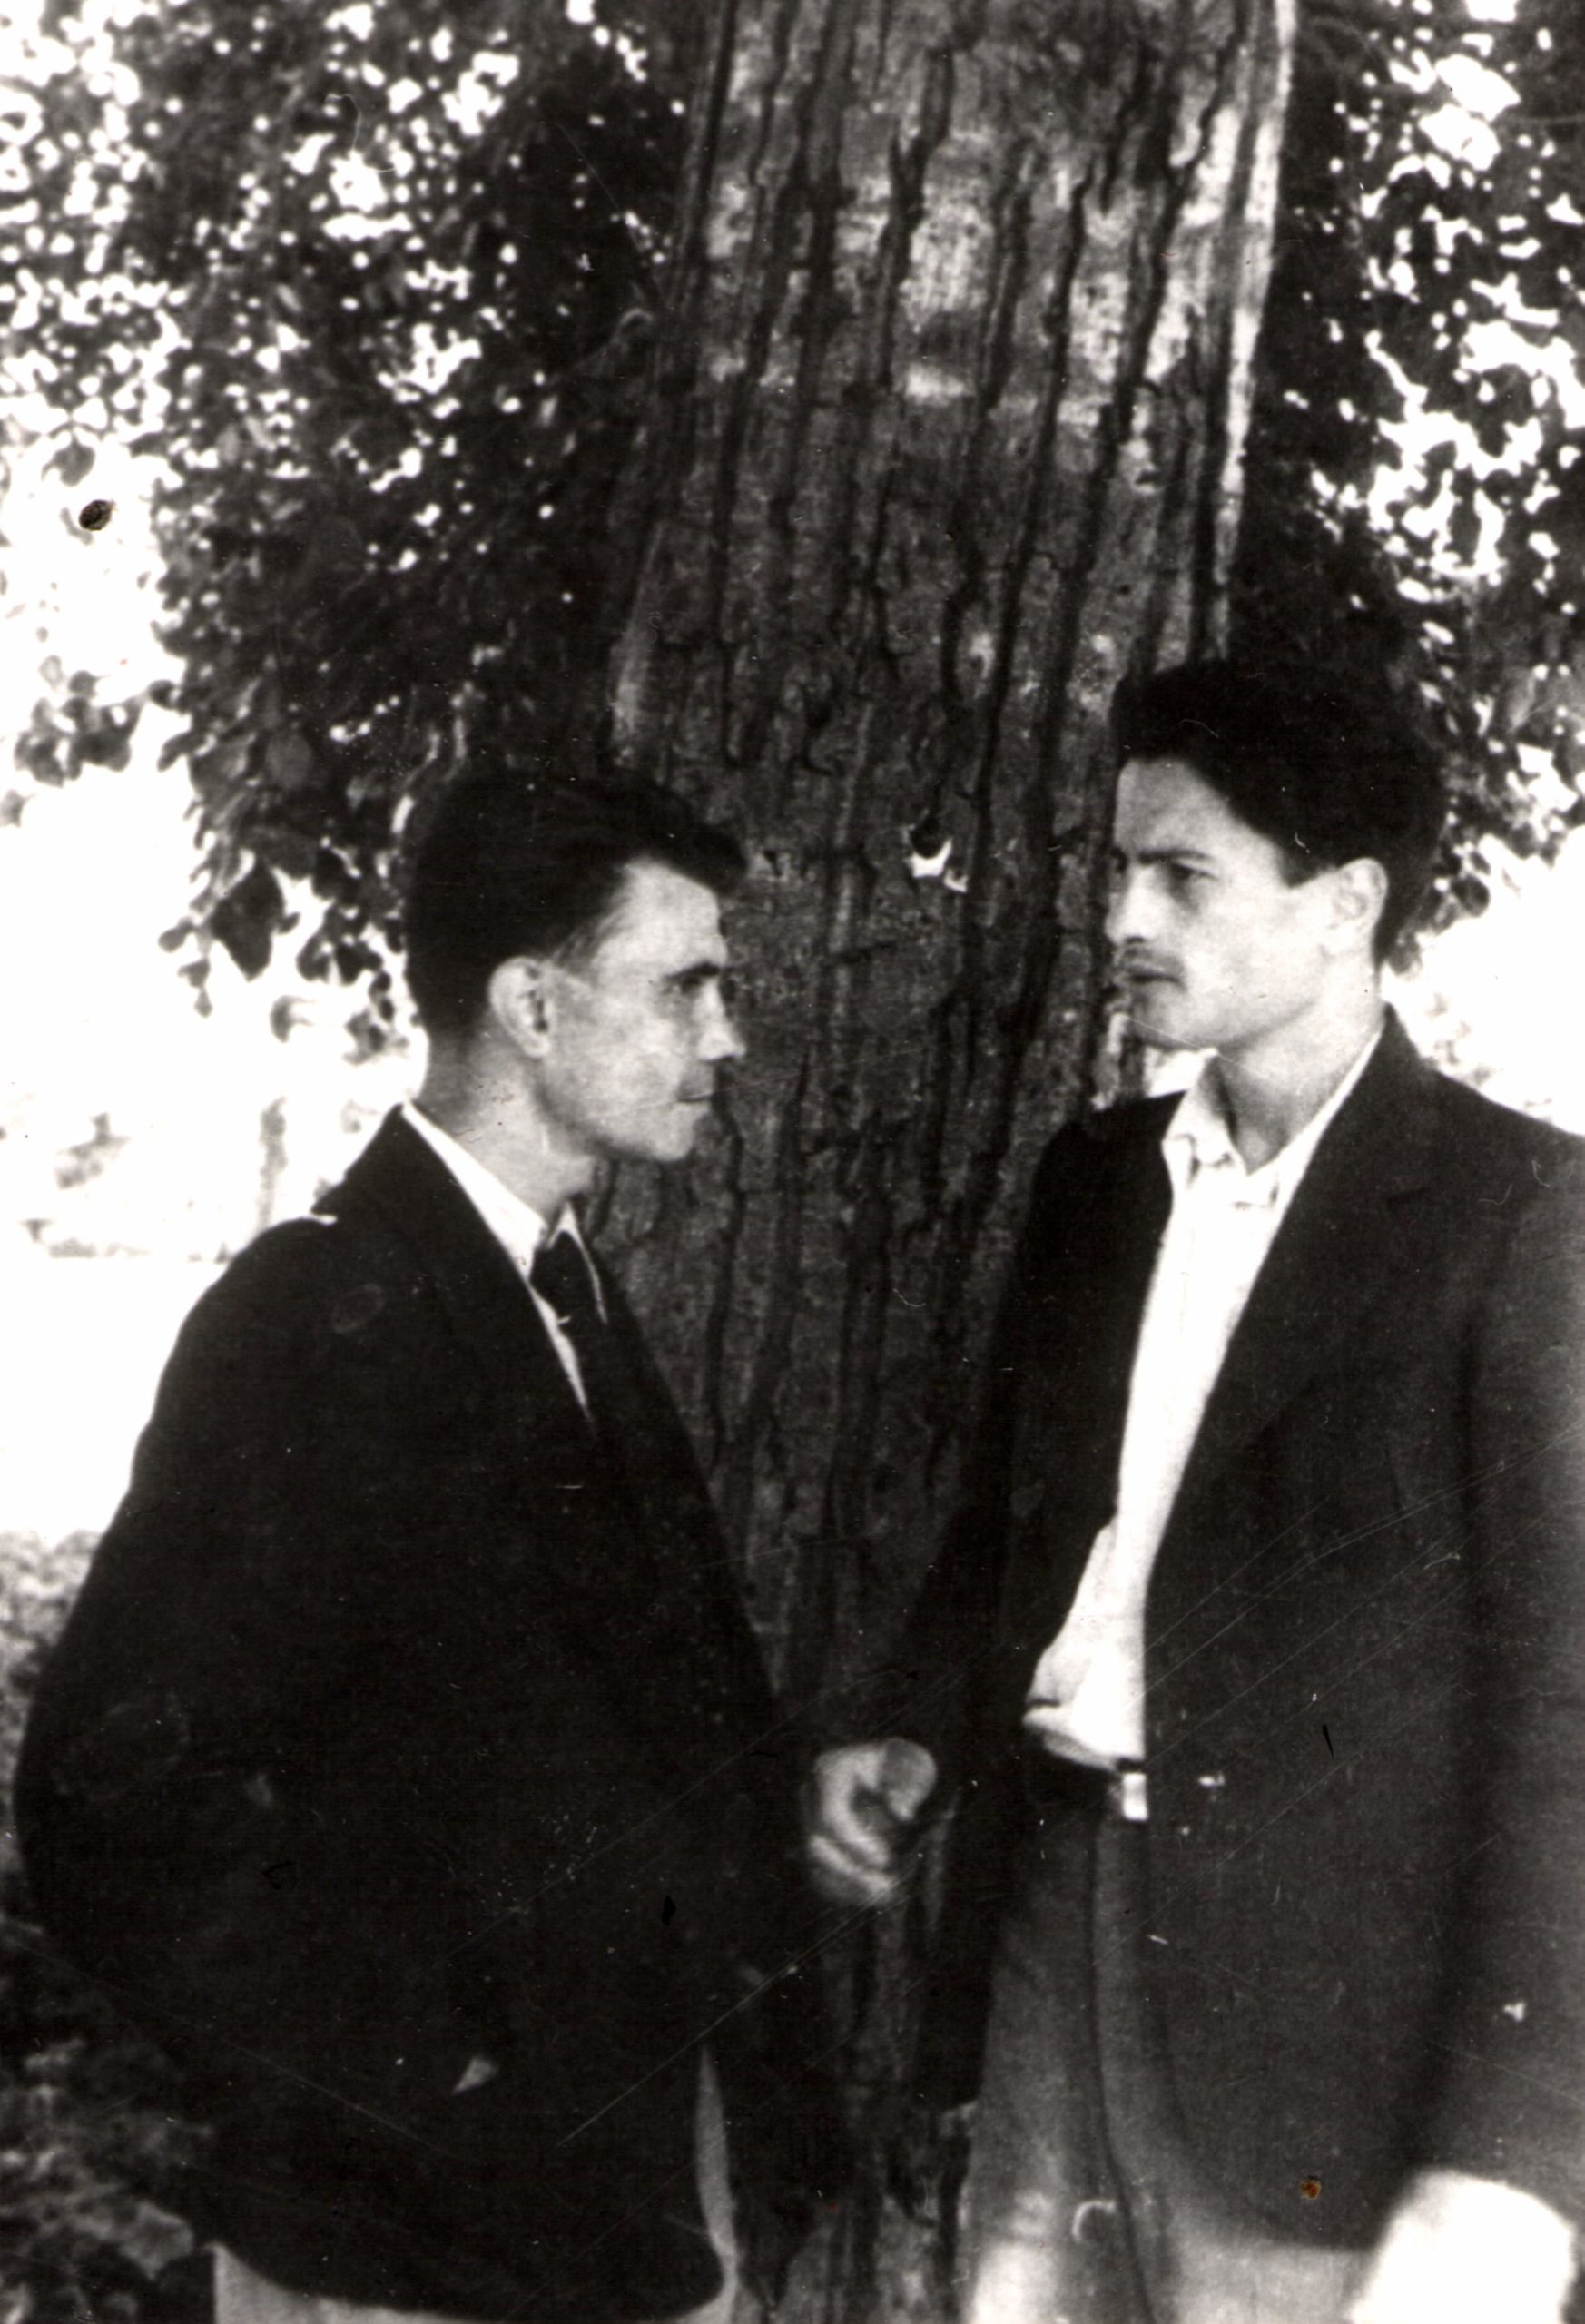 Lev Galper with his co-student Evgeny Stepanov